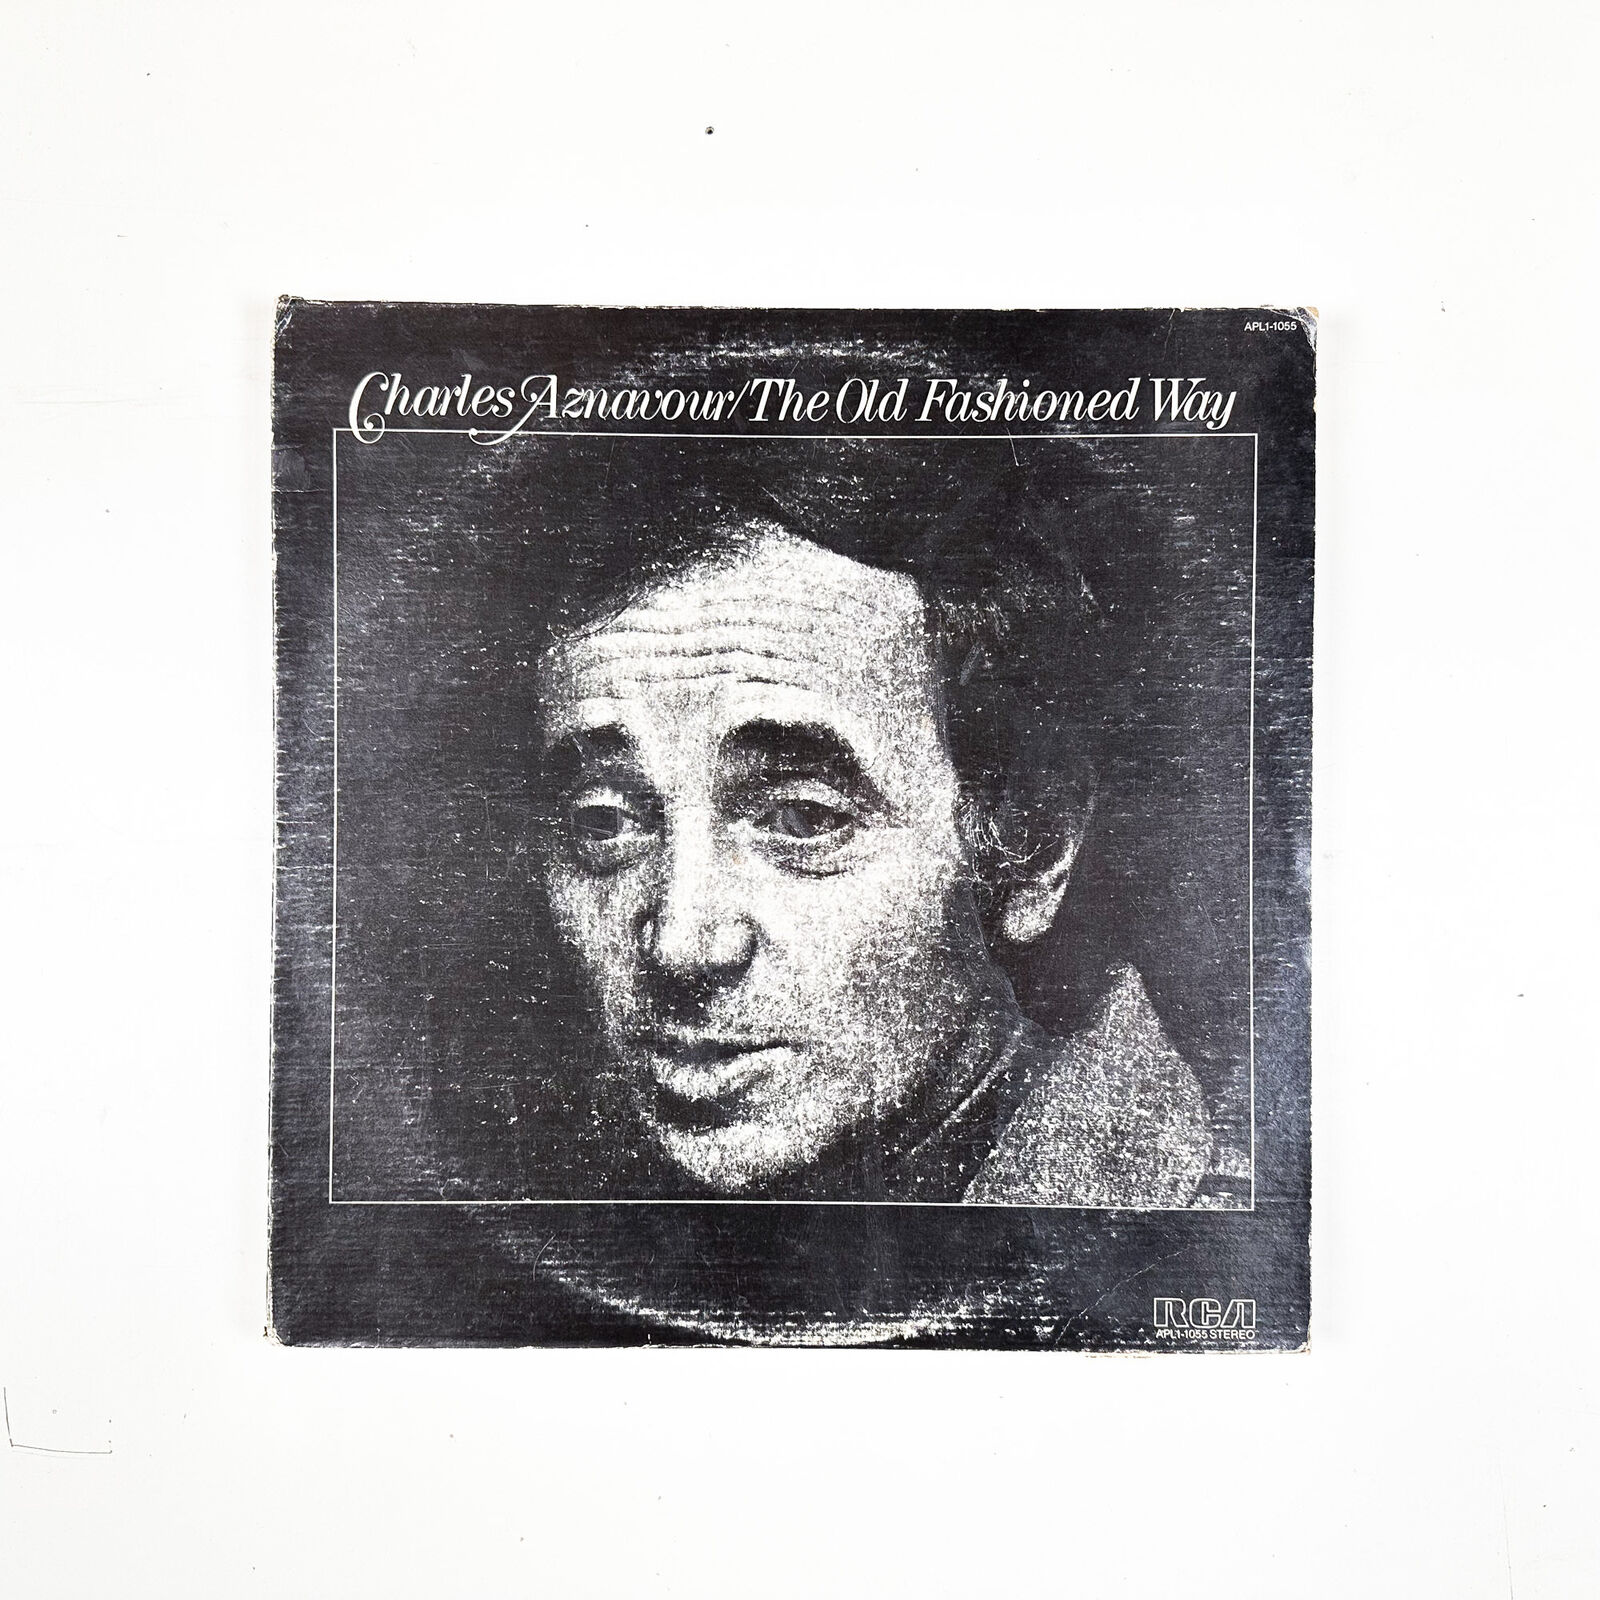 Charles Aznavour - The Old Fashioned Way - Vinyl LP Record - 1975